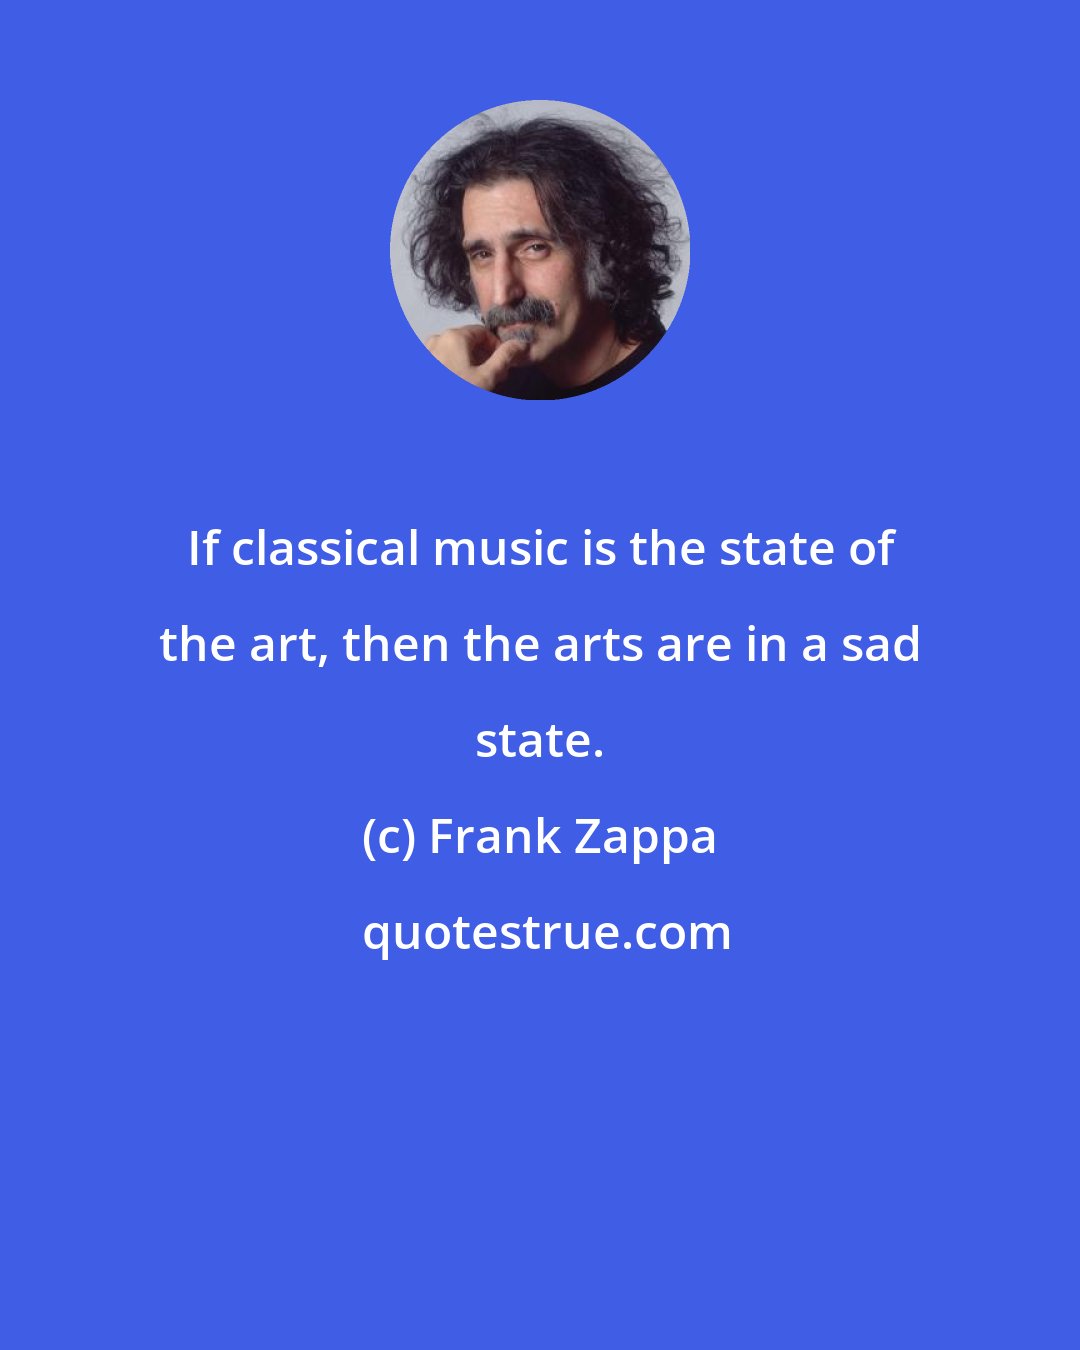 Frank Zappa: If classical music is the state of the art, then the arts are in a sad state.